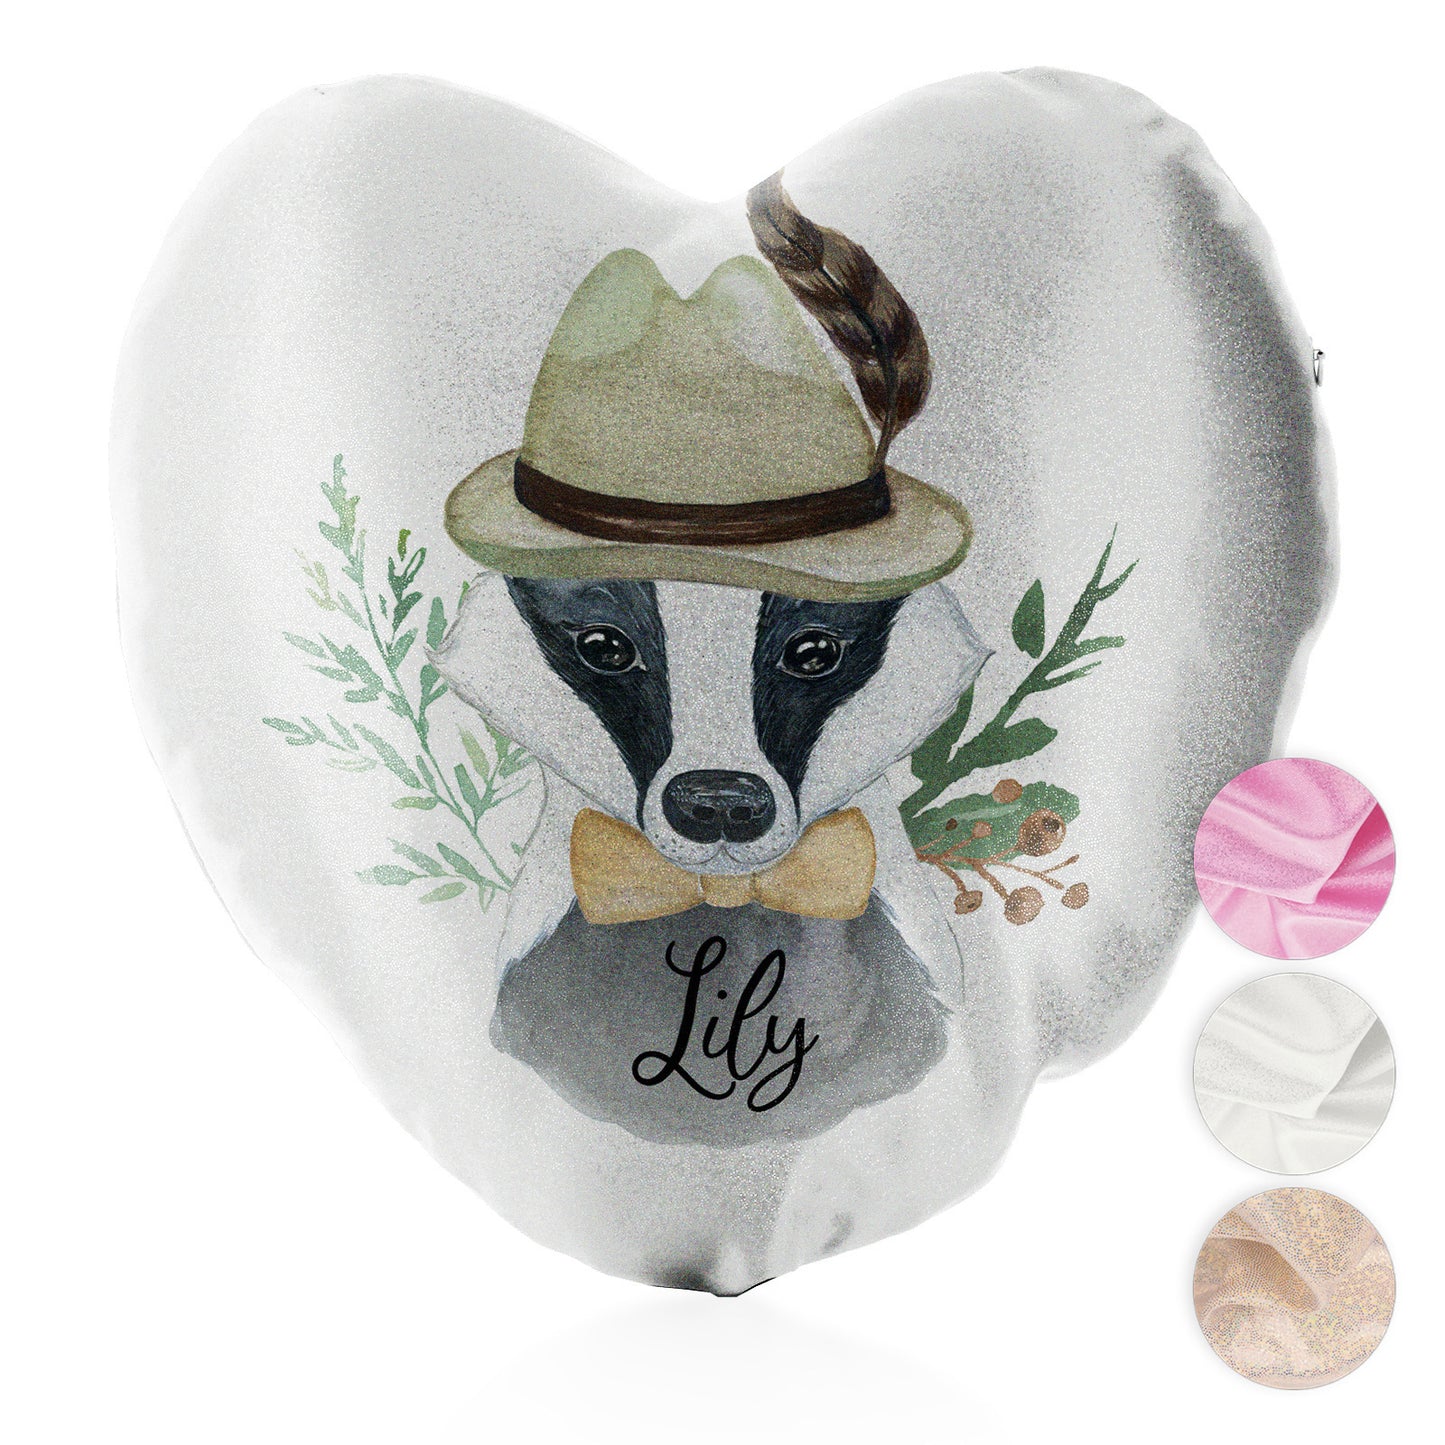 Personalised Glitter Heart Cushion with Badger Feather Hat and Cute Text